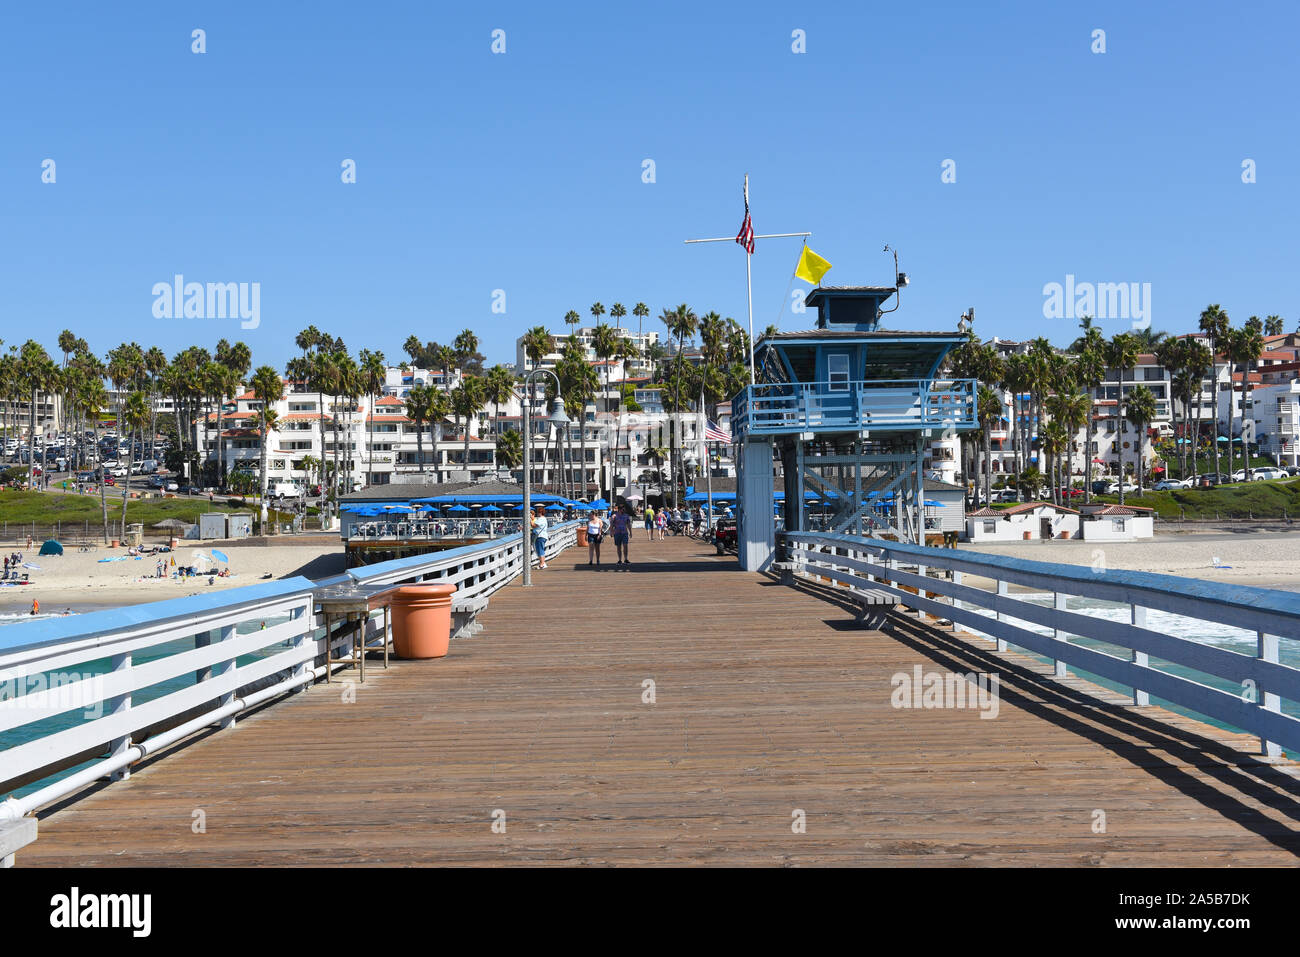 SAN CLEMENTE, CALIFORNIA - 18 OCT 2019: The San Clemente Pier Looking towards the beach and homes on the surrounding hills. Stock Photo